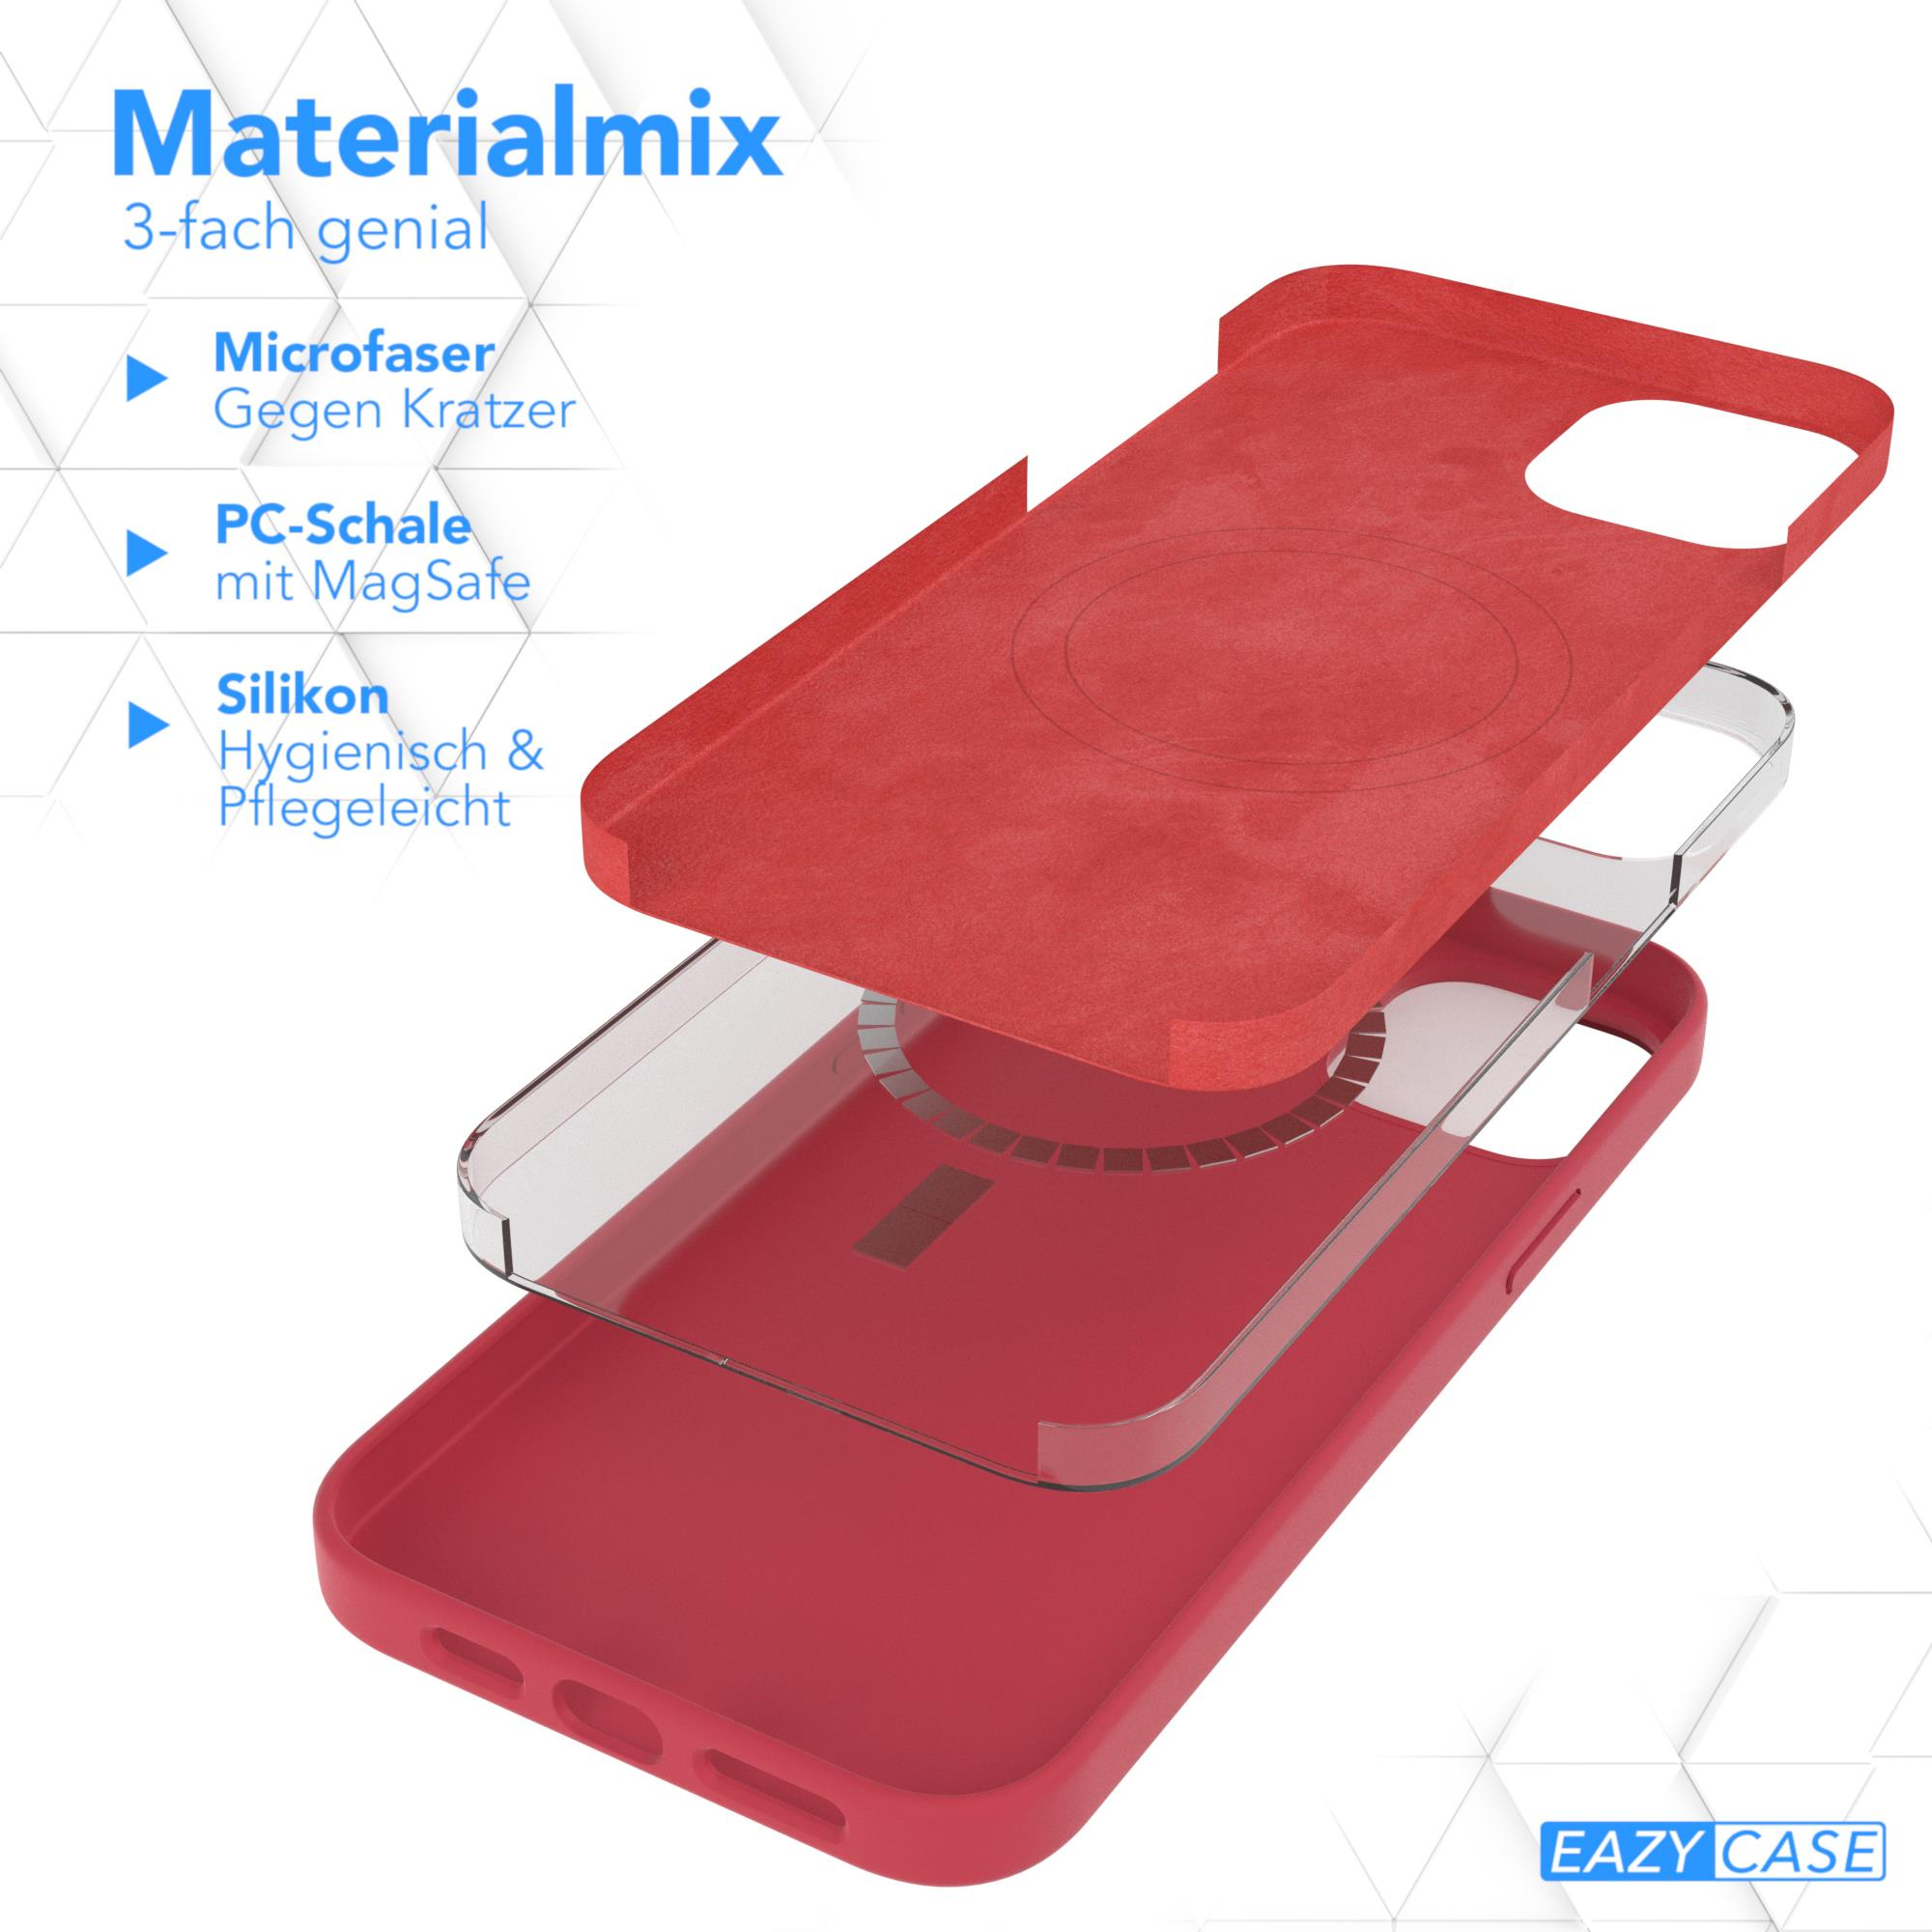 Plus, iPhone Premium Backcover, EAZY 15 Handycase Silikon Beere Rot CASE Apple, MagSafe, mit /